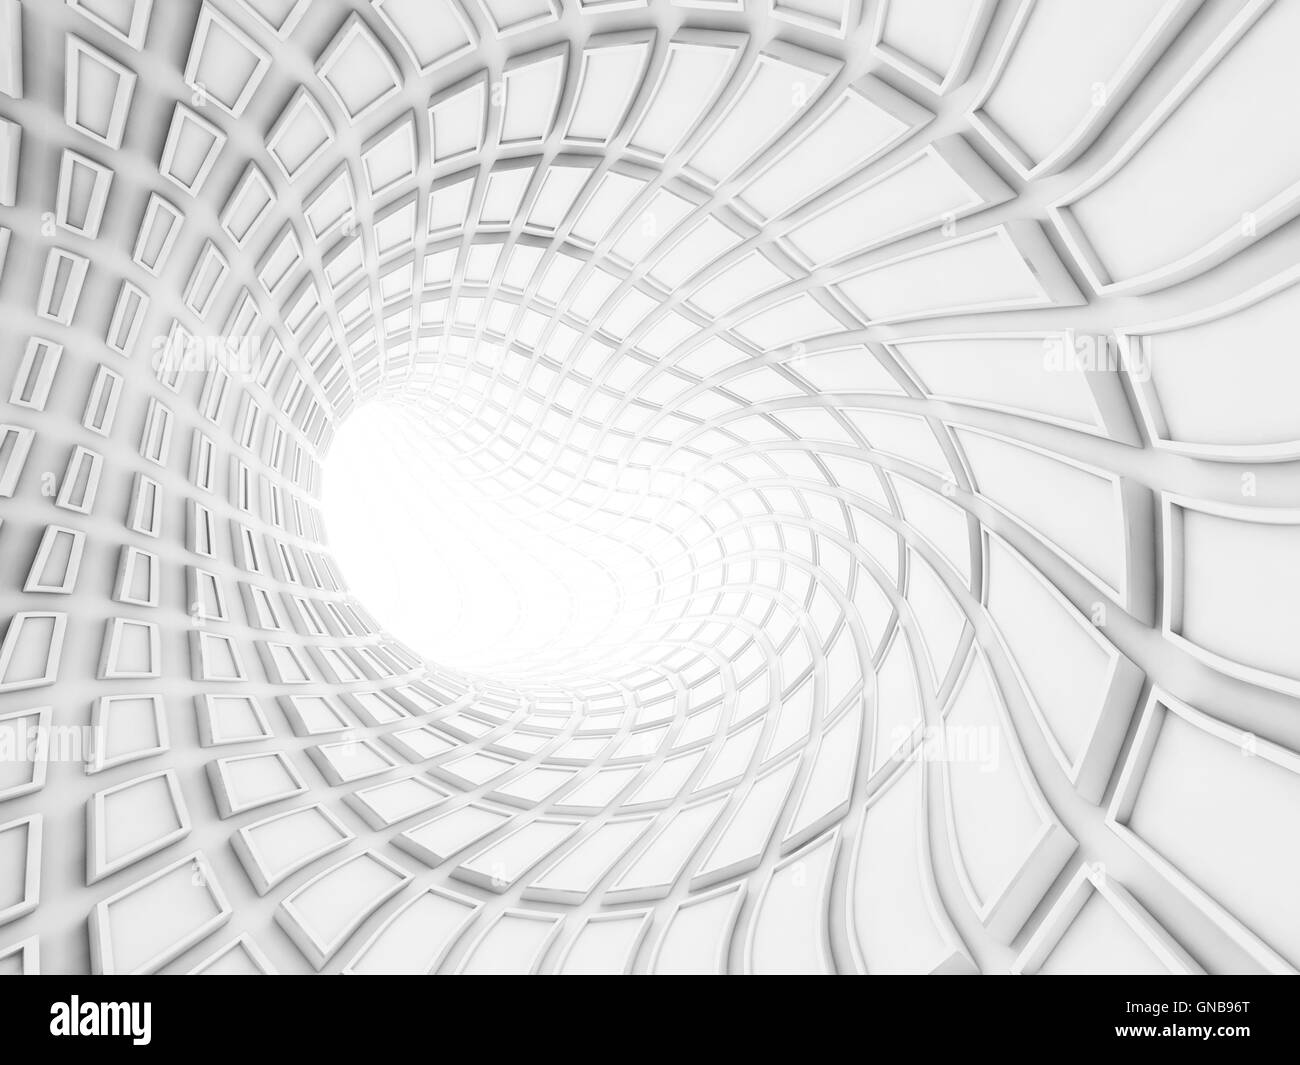 Bent white tunnel interior with technological extruded tiles. Digital 3d illustration Stock Photo